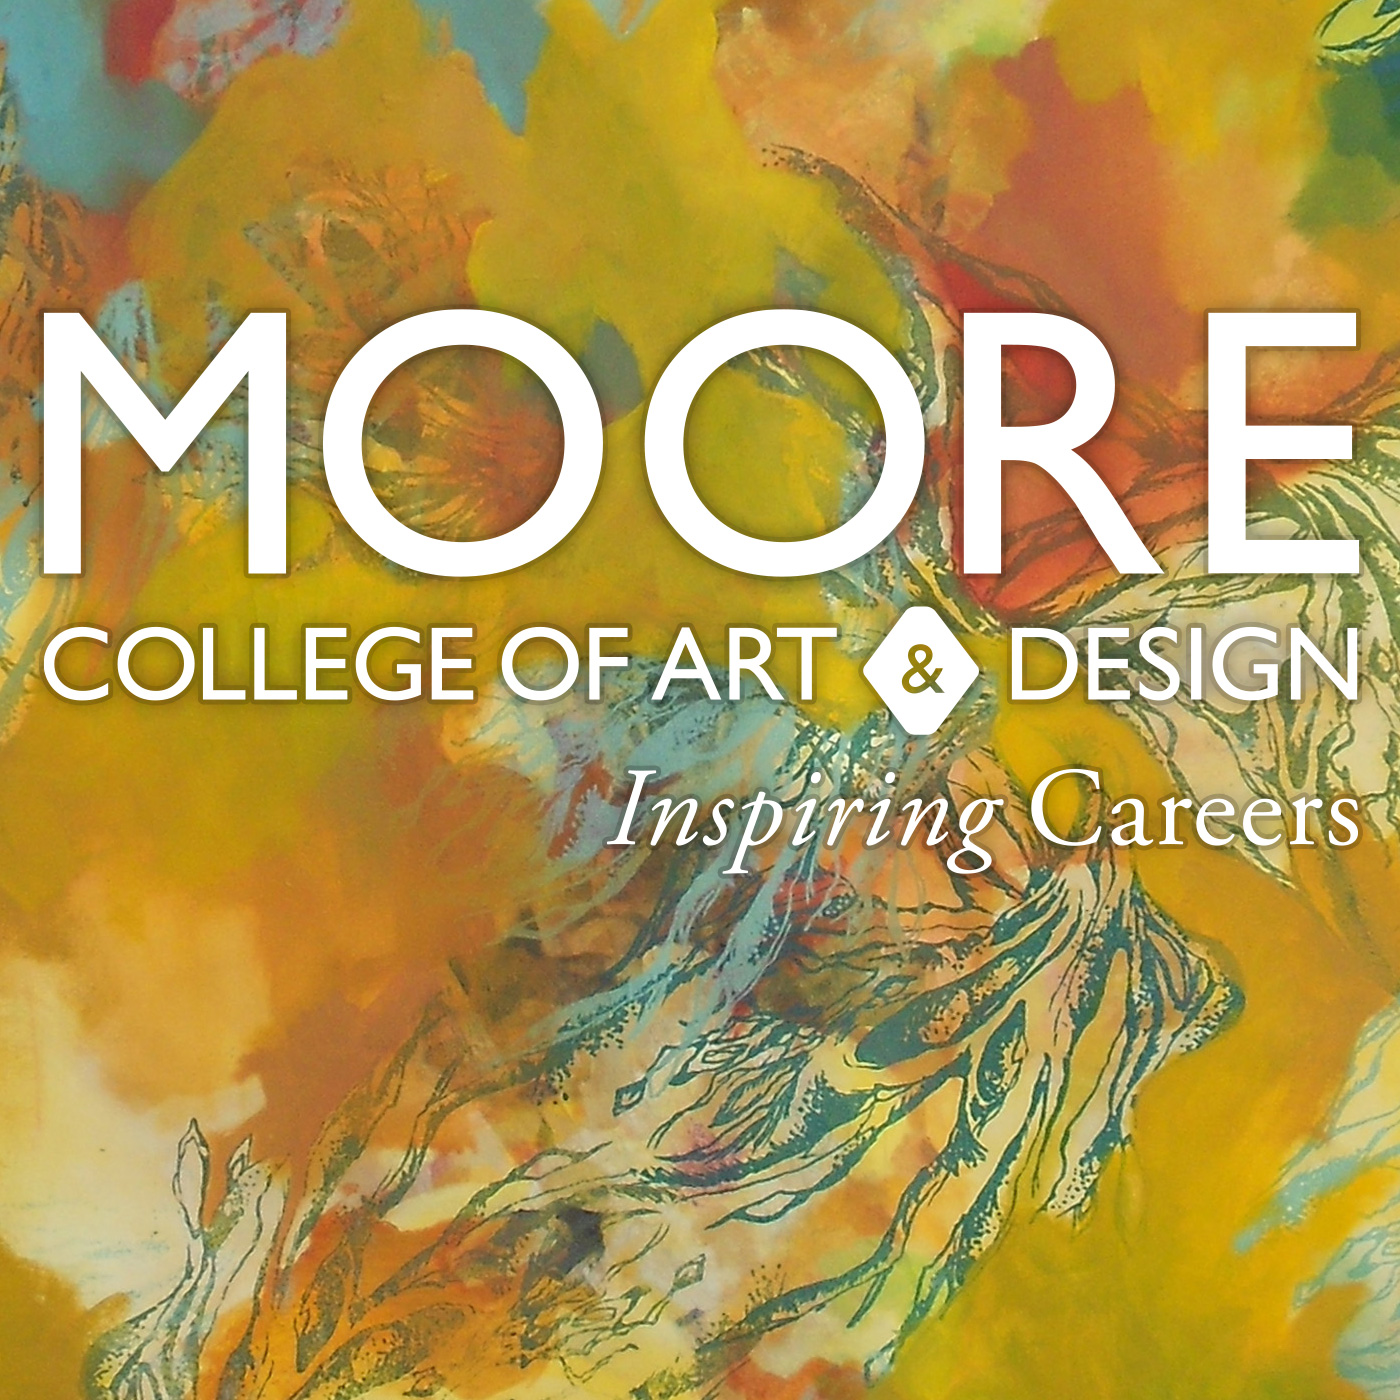 Moore College